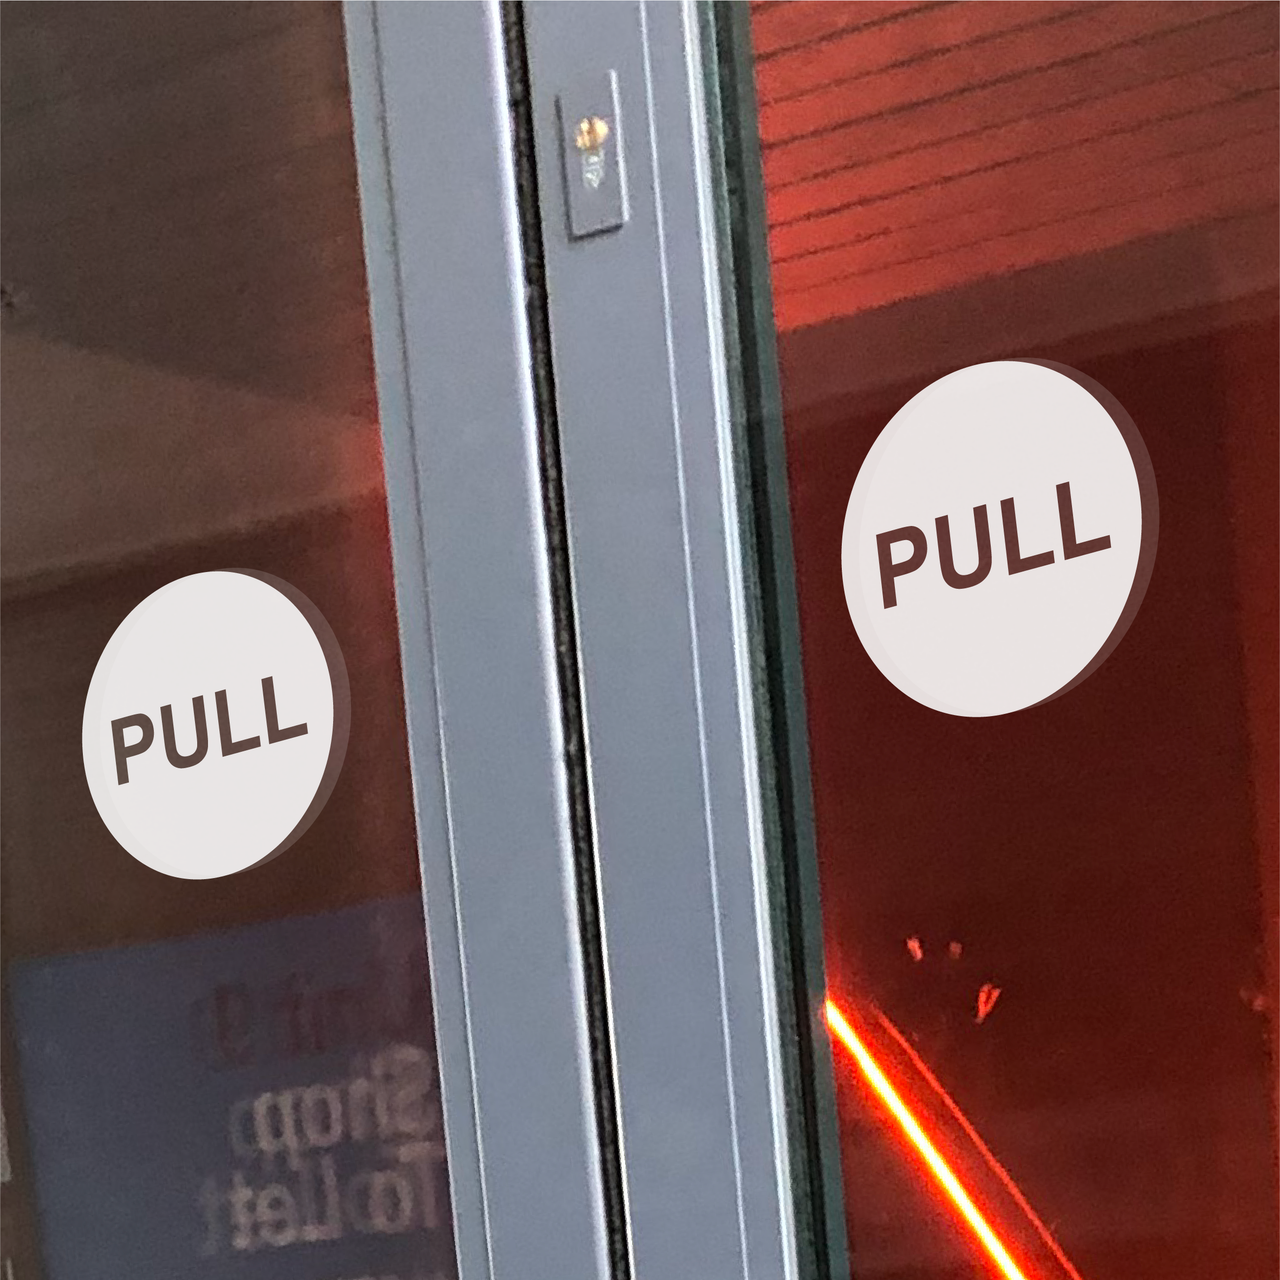 PUSH PULL - Business Shop Decal